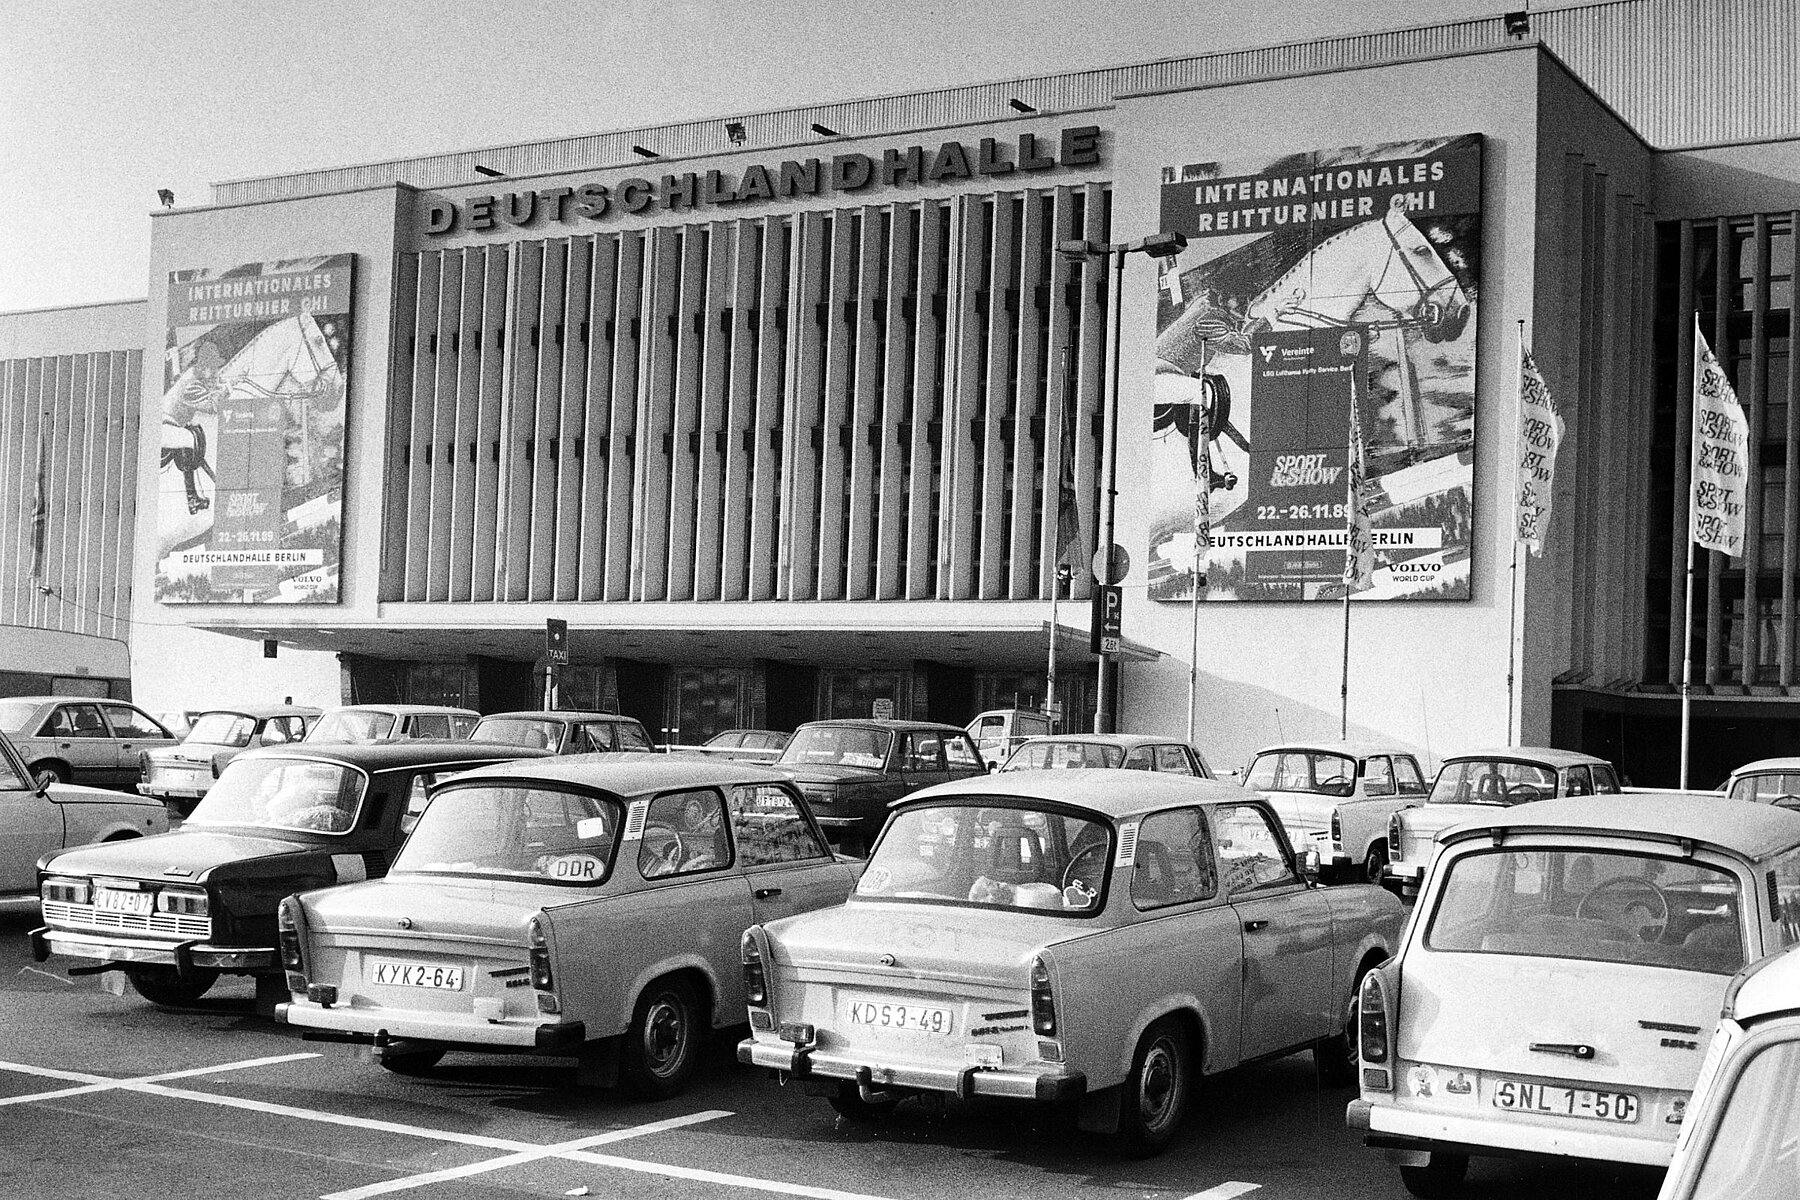 A row of Trabants is parked in front of a building with the central lettering Deutschlandhalle. To the left and right of the building are posters advertising an international horse show in November 1989.